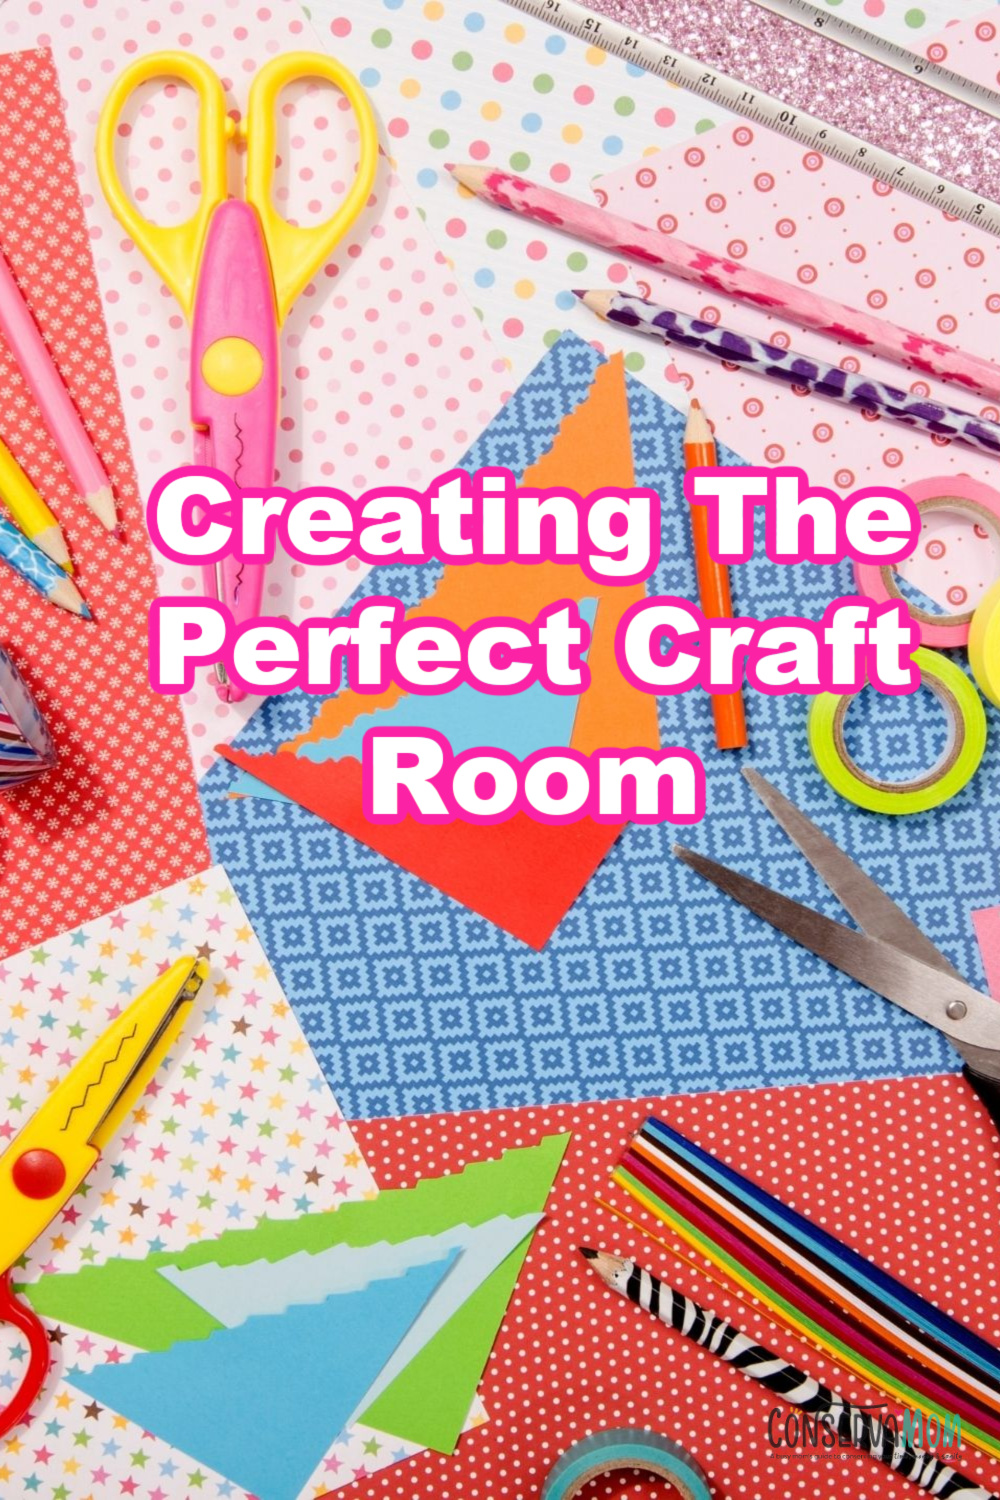 Creating The Perfect Craft Room 